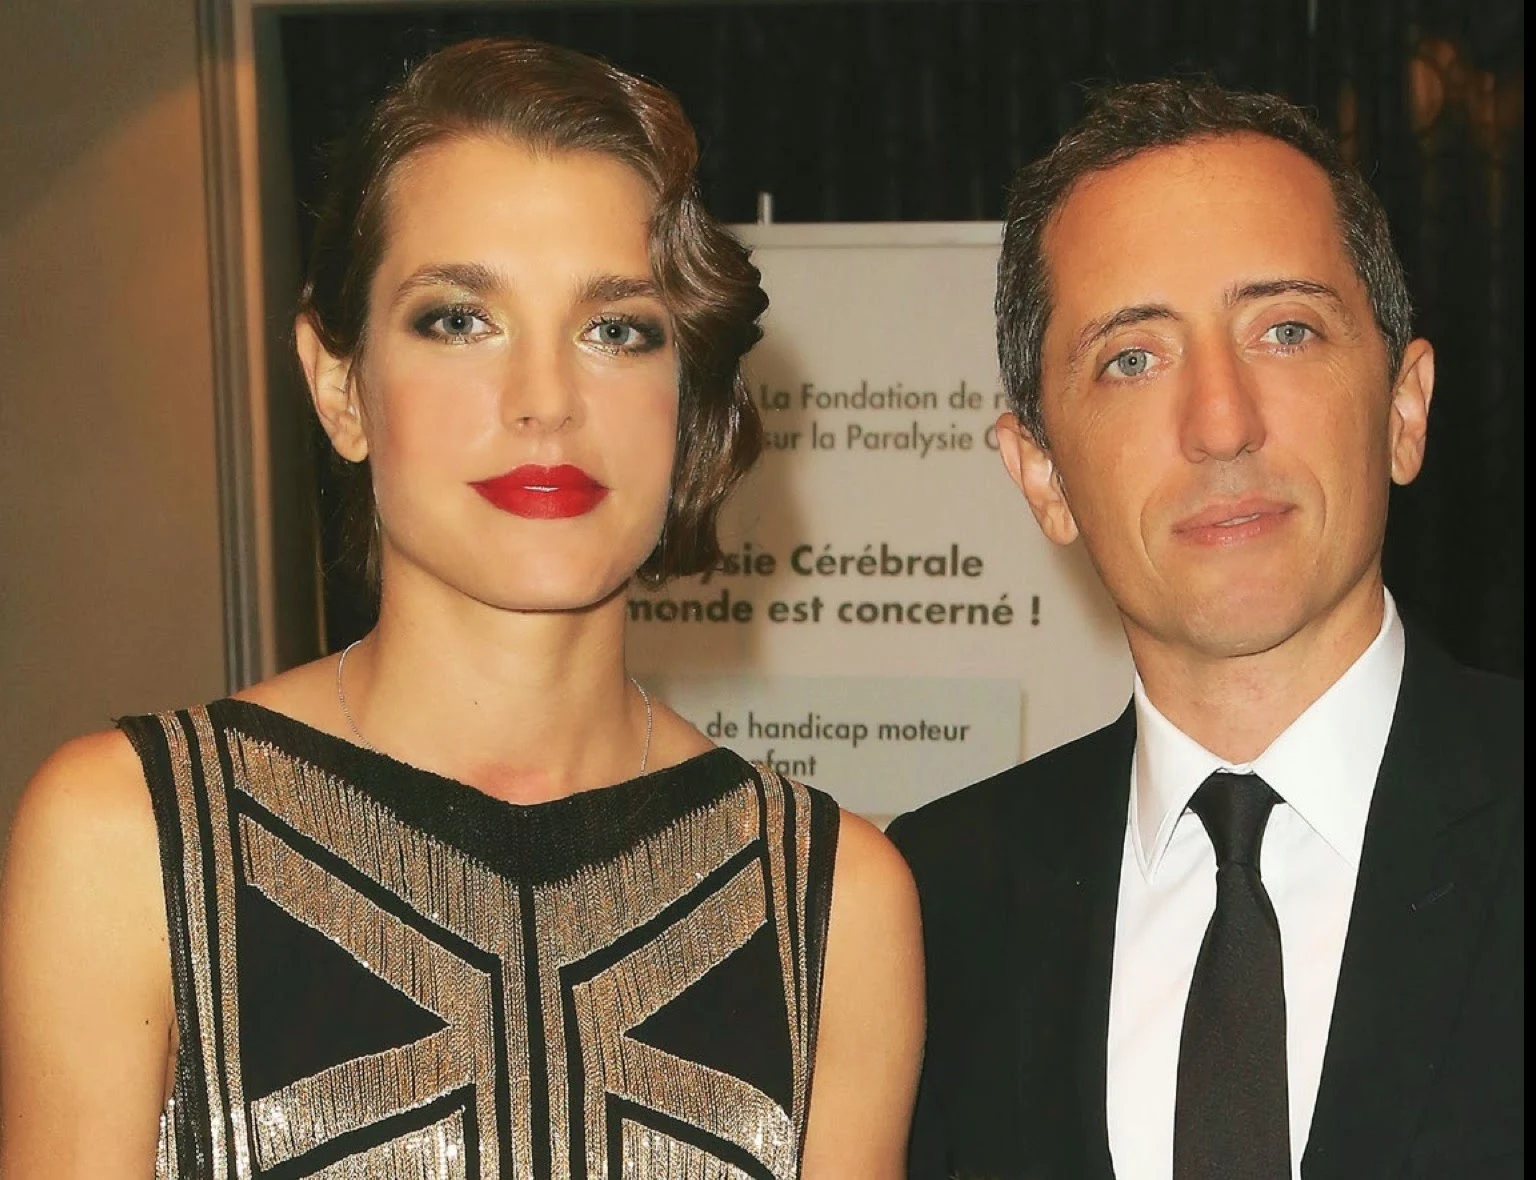 Andrea Casiraghi attended the annual party of the Foundation Motrice